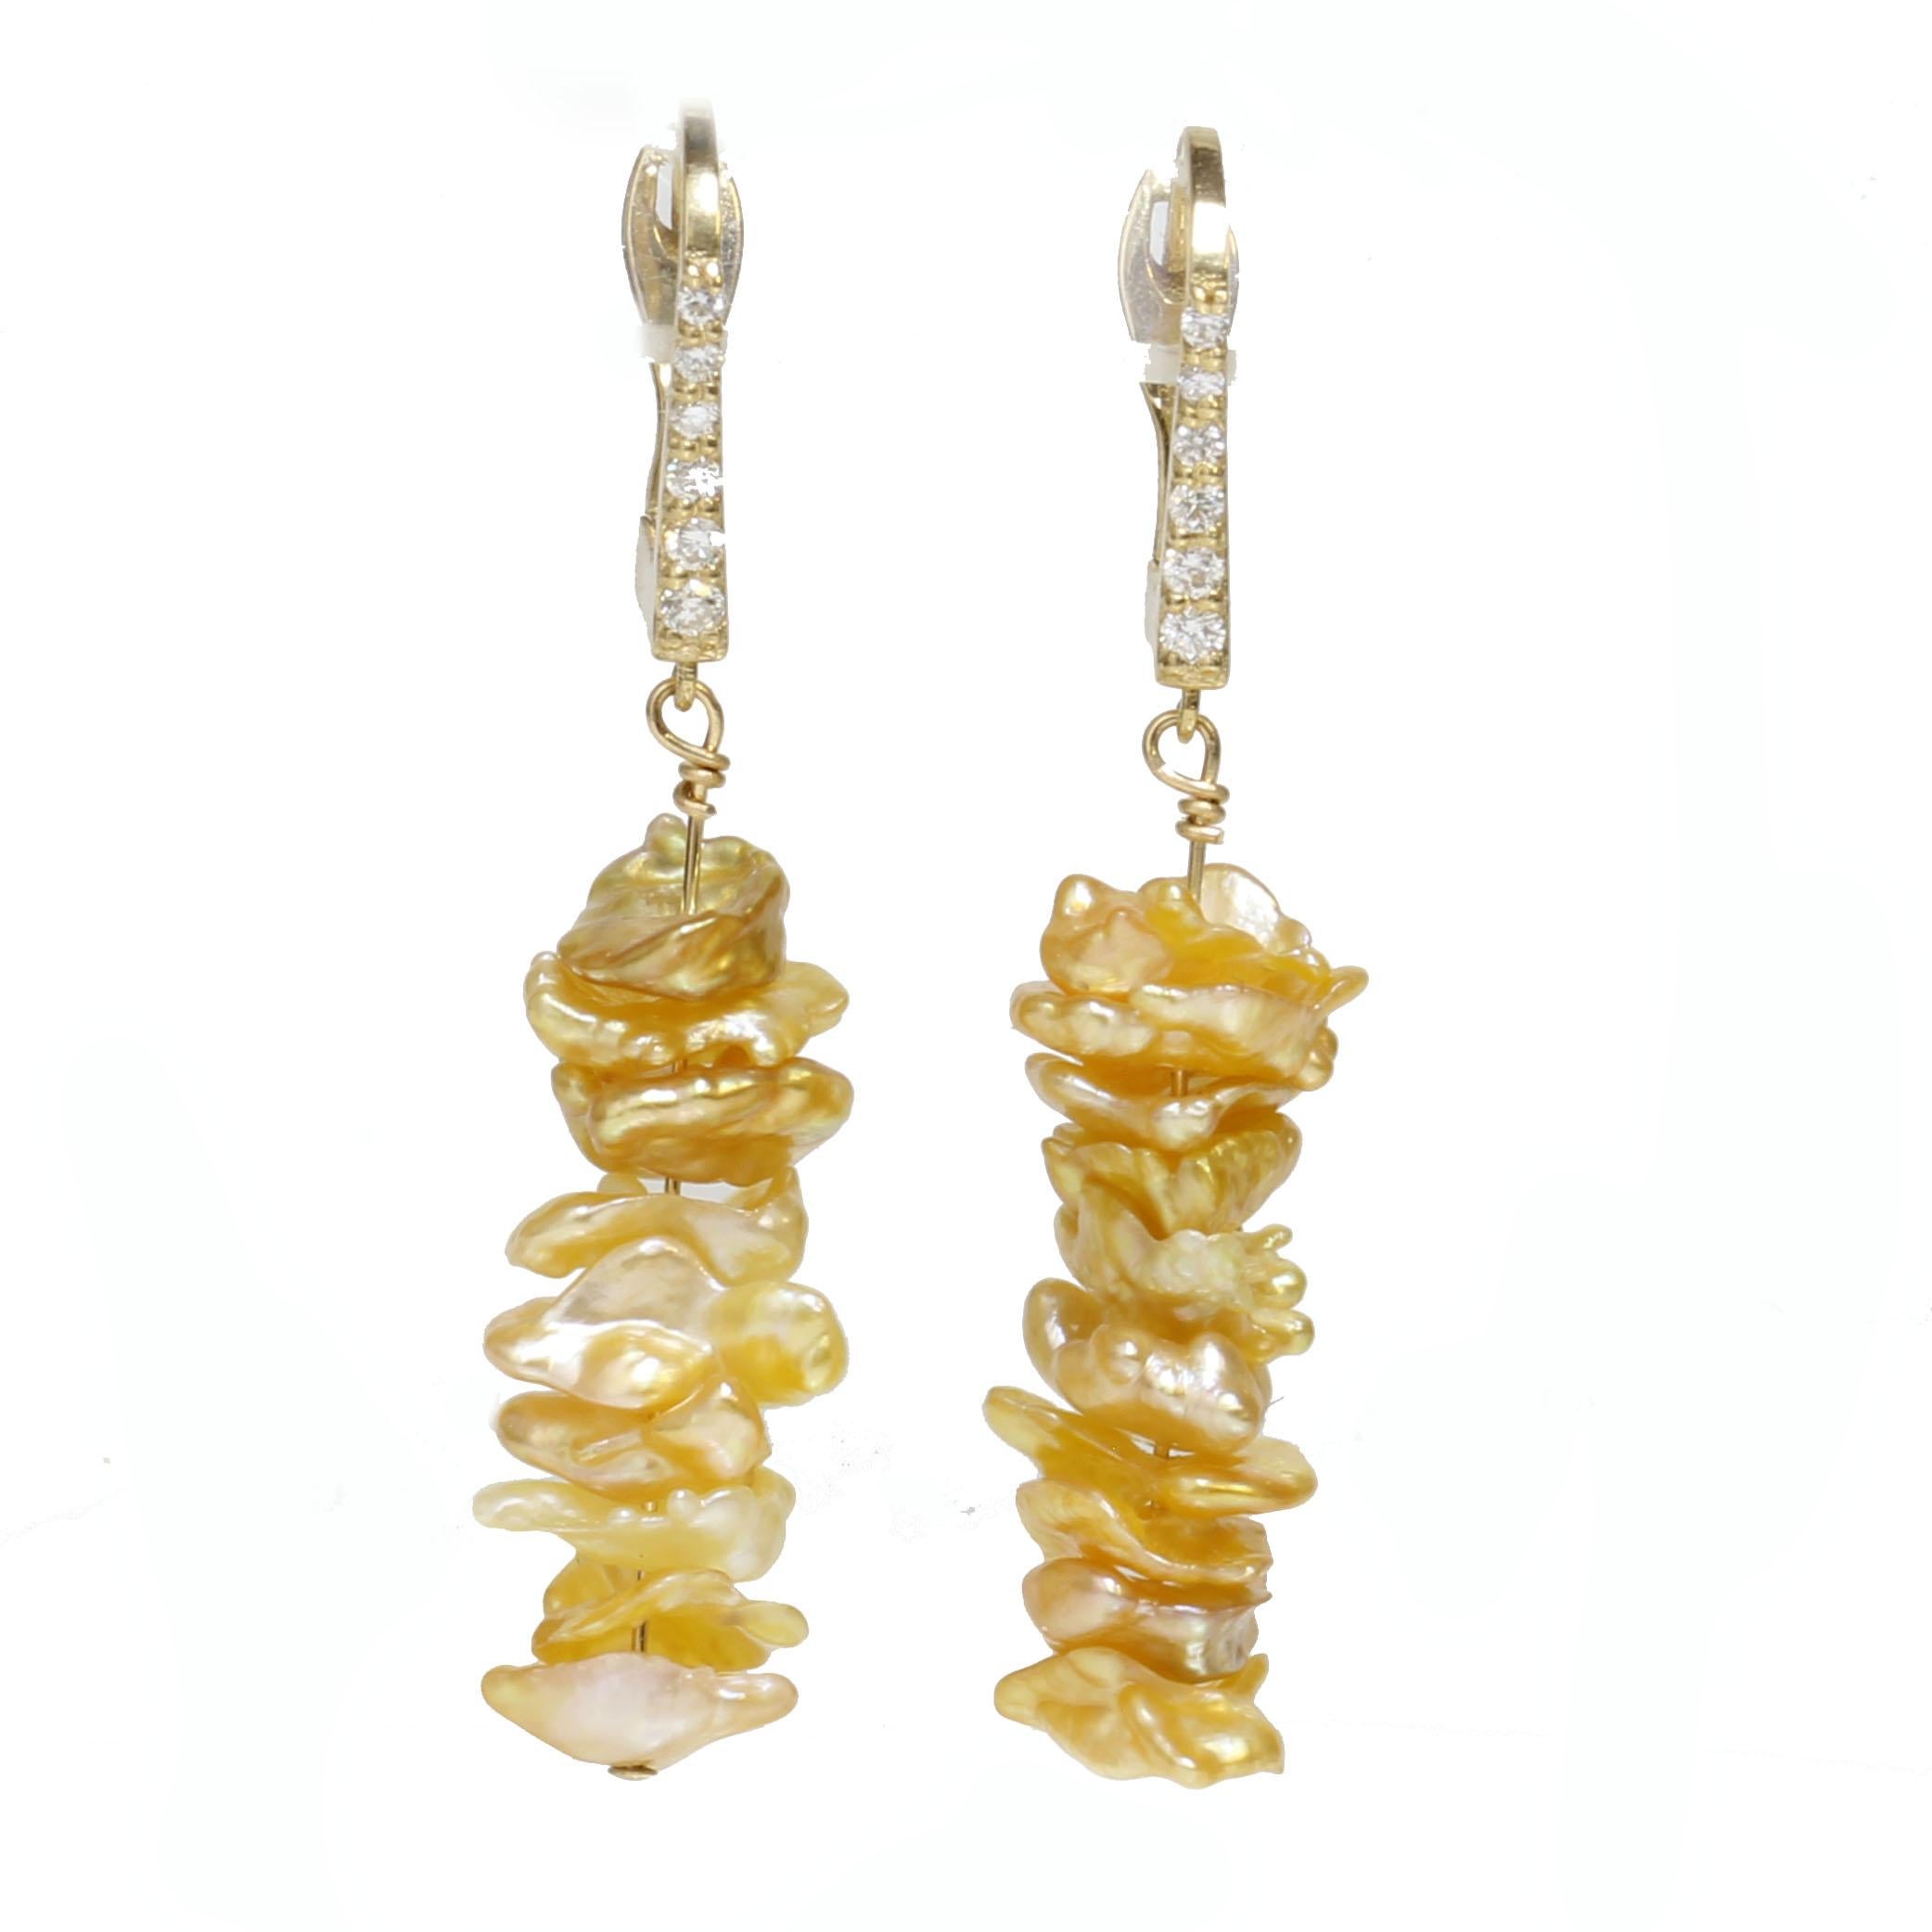 Diamond hook leverback natural golden south sea pearl dangle earrings. The earrings is set in 14k yellow gold with 0.12ct of diamonds.  The total length of the earrings is 1